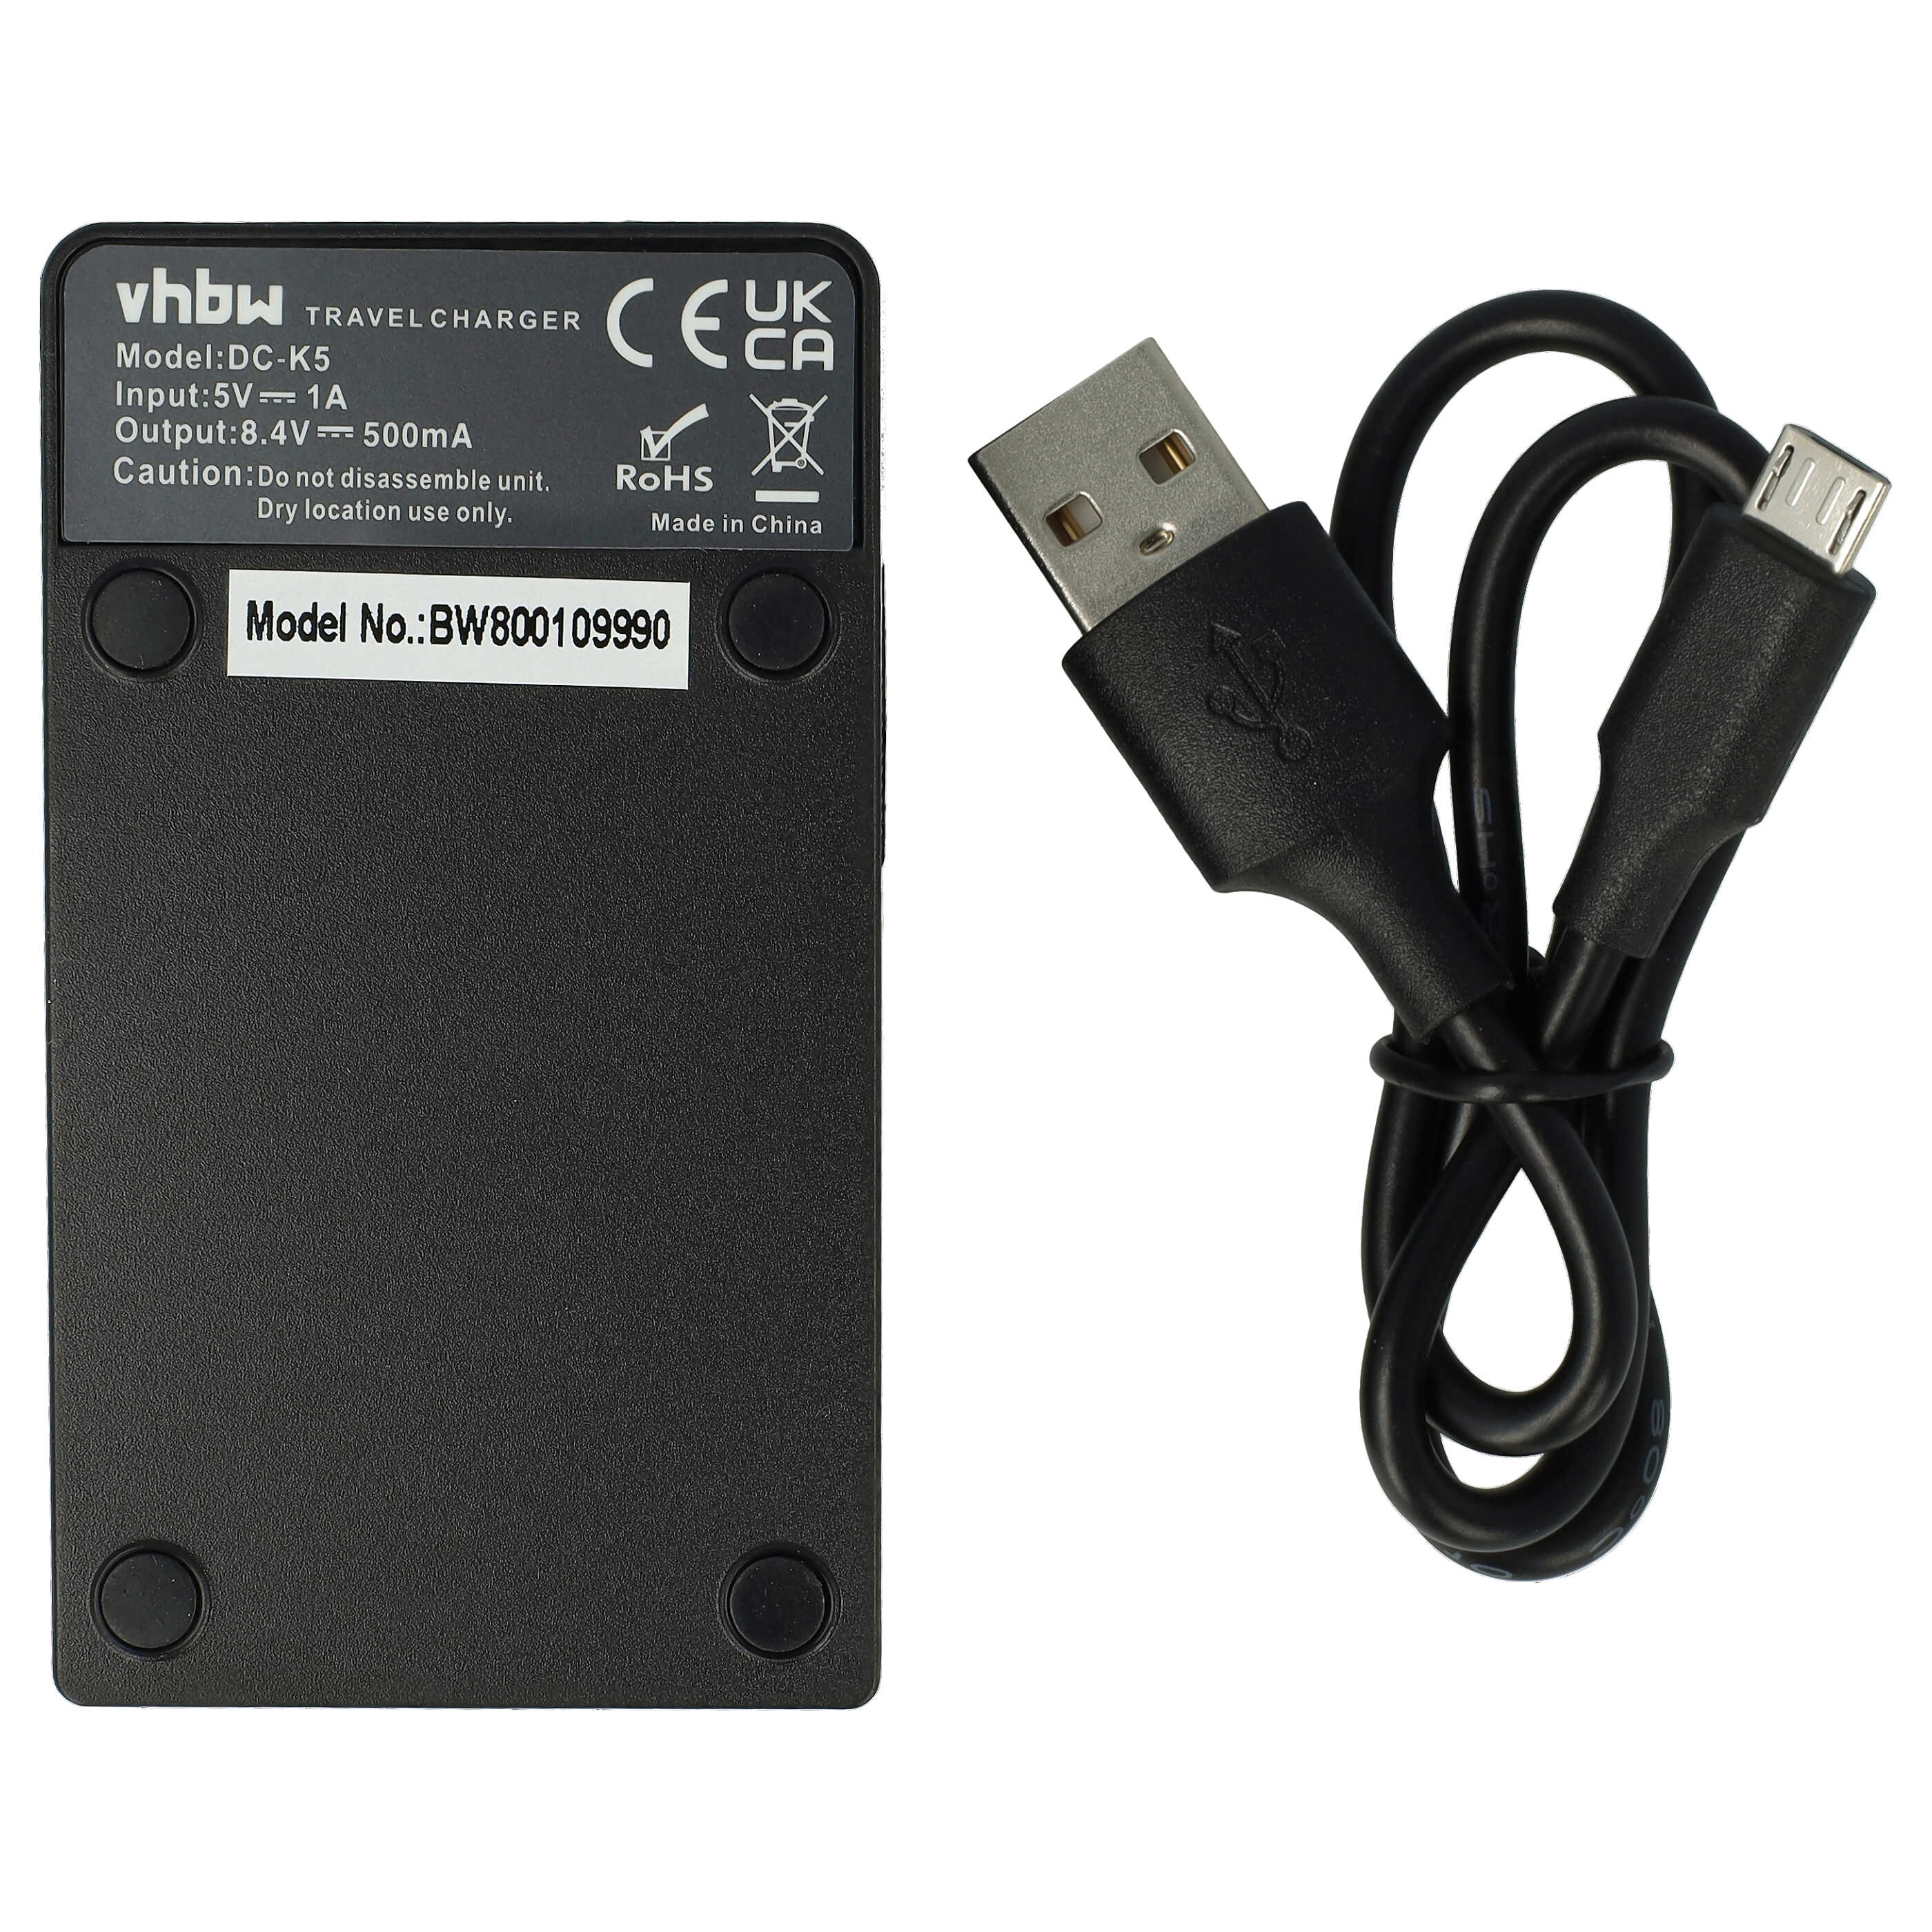 Battery Charger suitable for Lumix DMC-GH3 Camera etc. - 0.5 A, 8.4 V